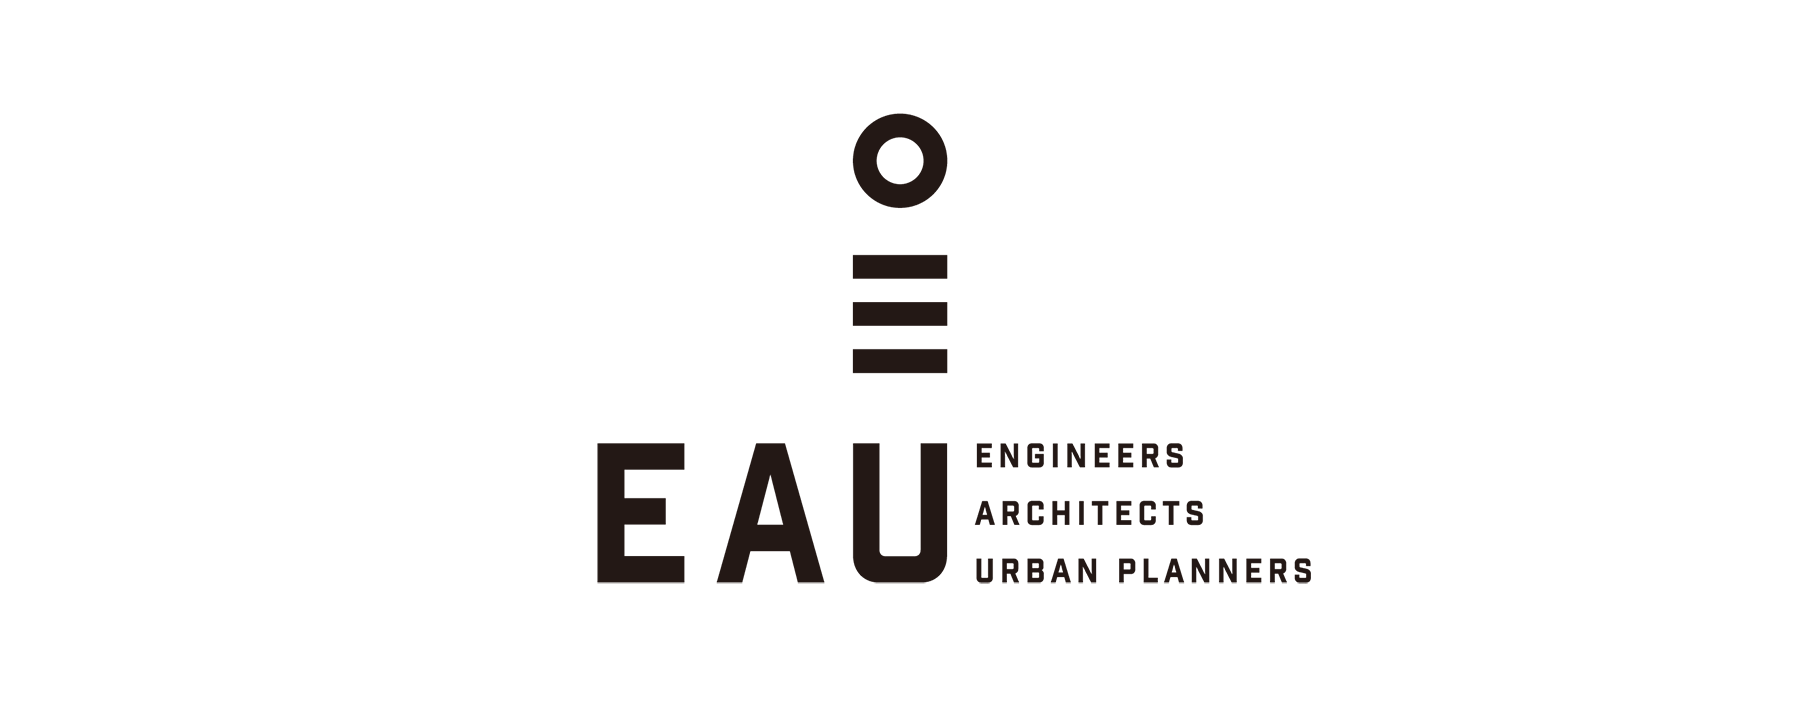 EAU engineers architects urban planners